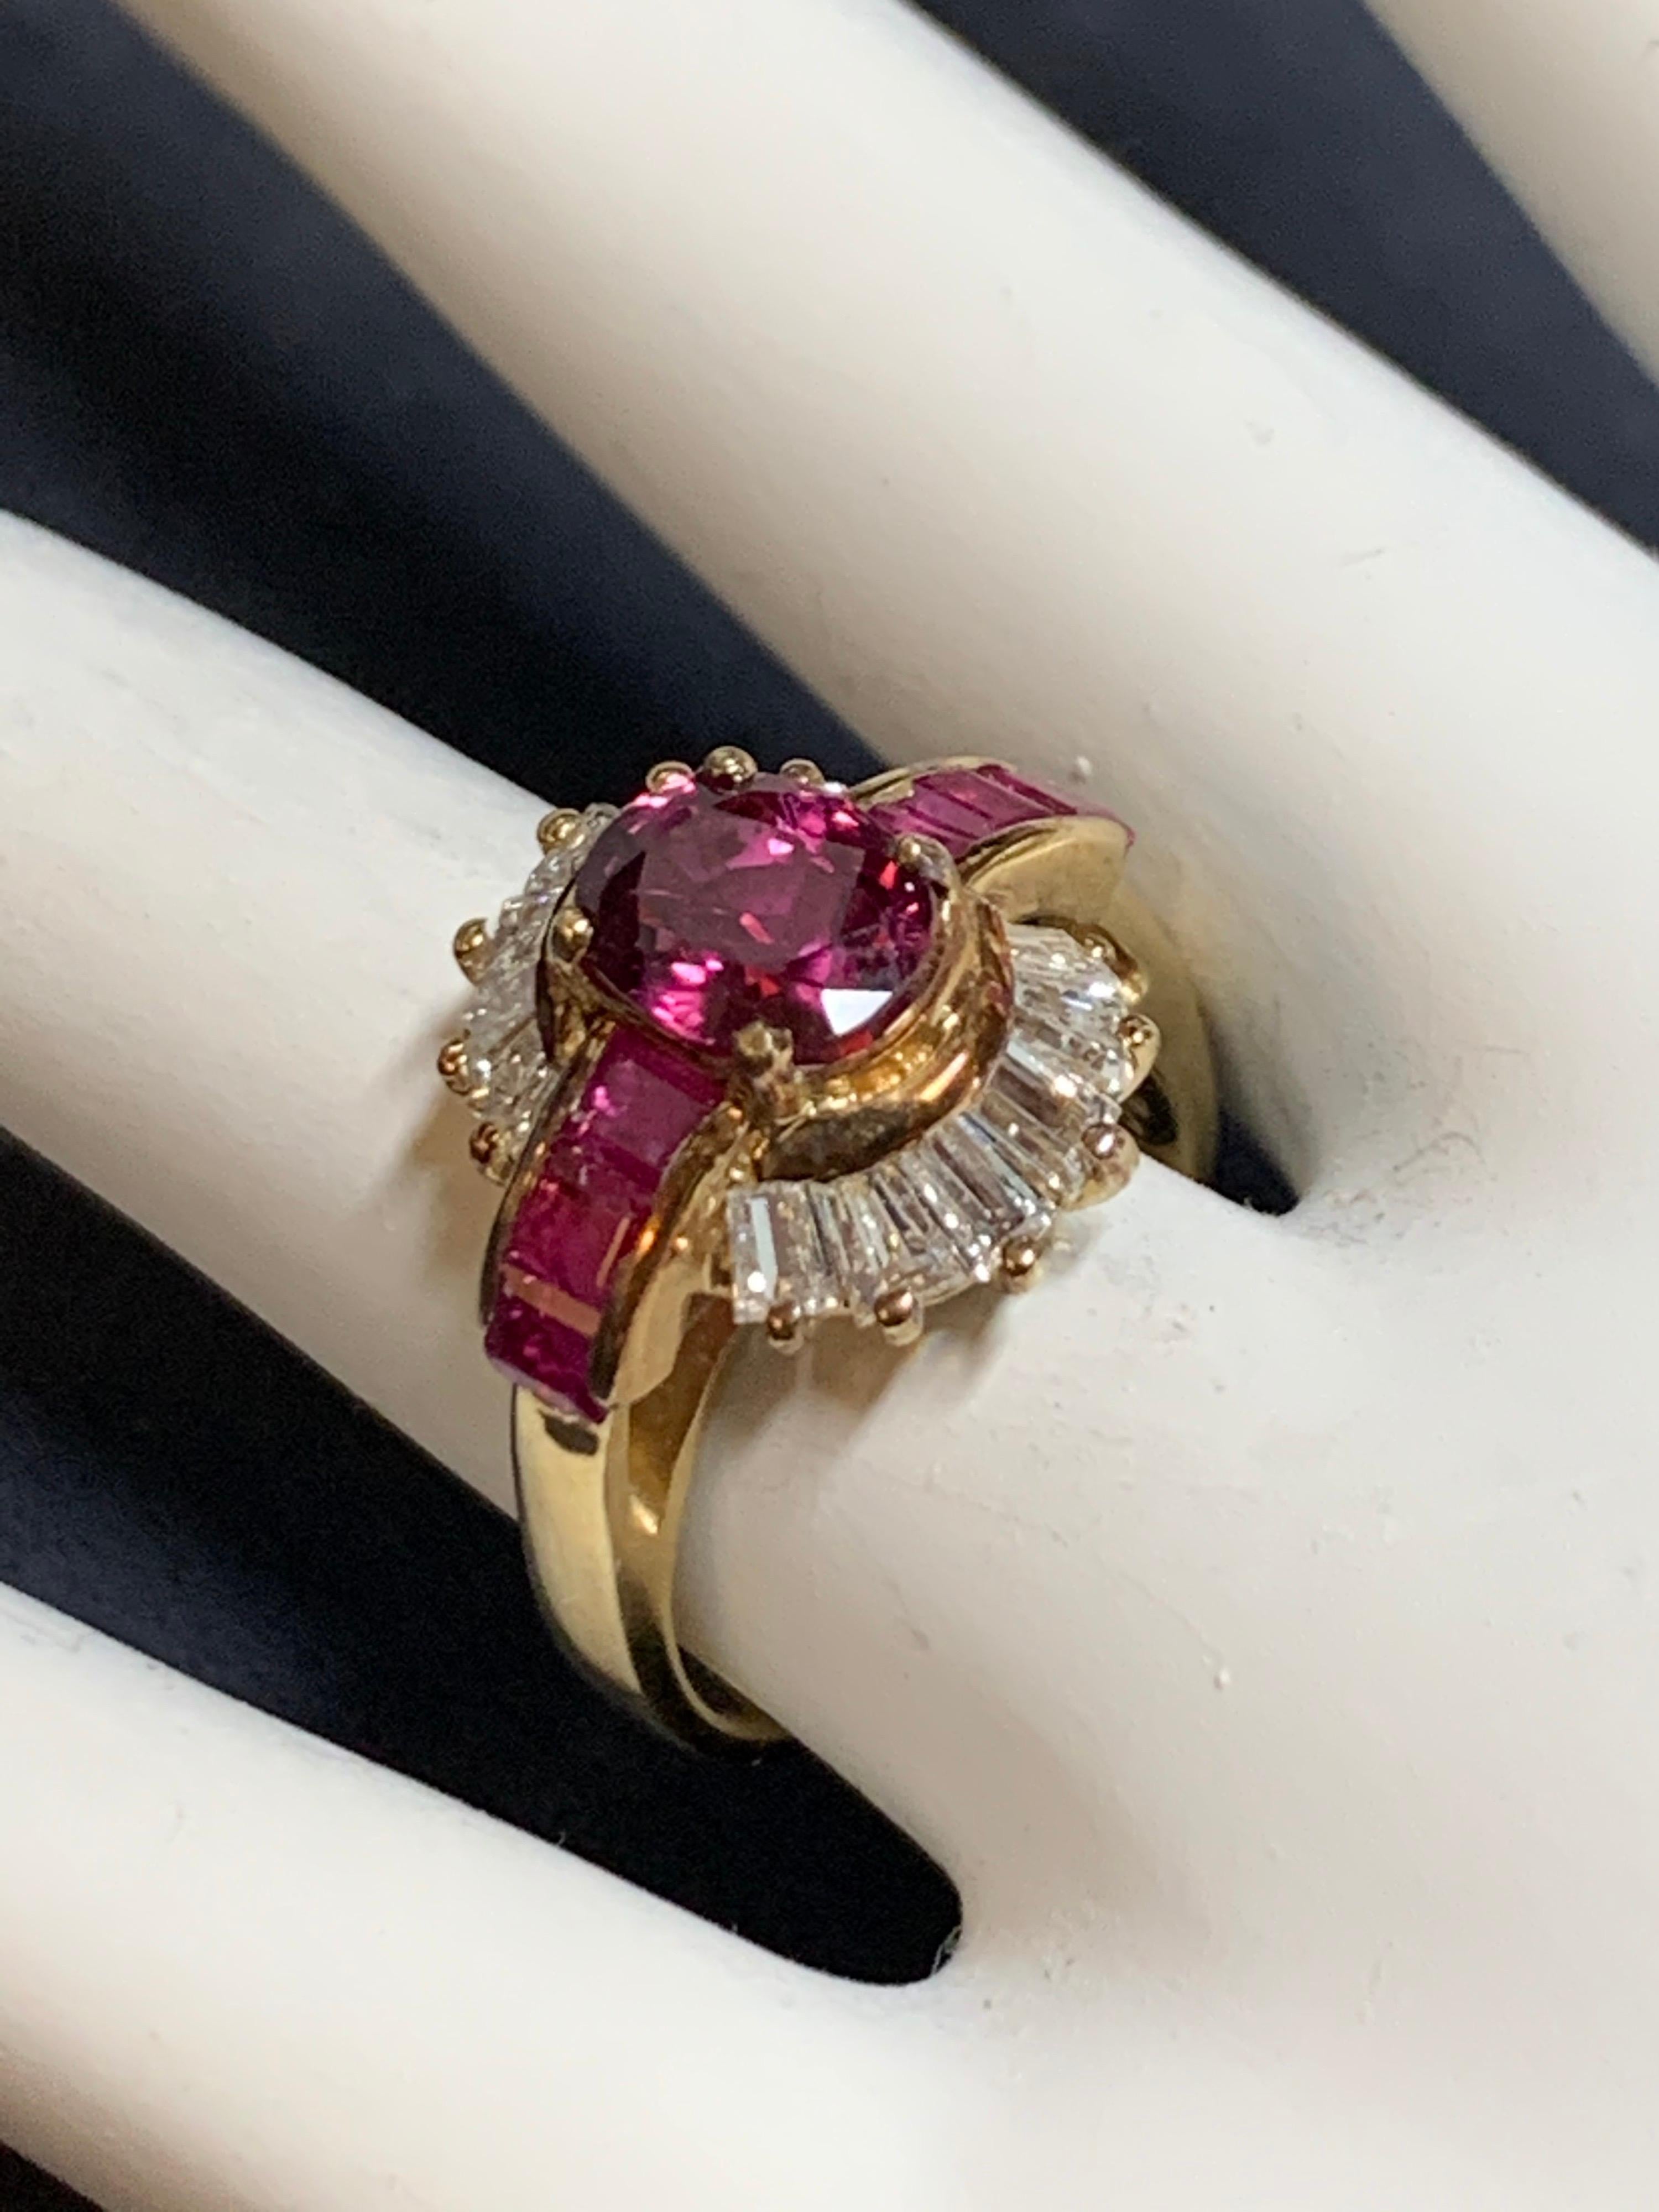 Oval Cut Retro Gold Cocktail Ring 3.25 Carat Natural Oval Gem Ruby and Diamond circa 1950 For Sale